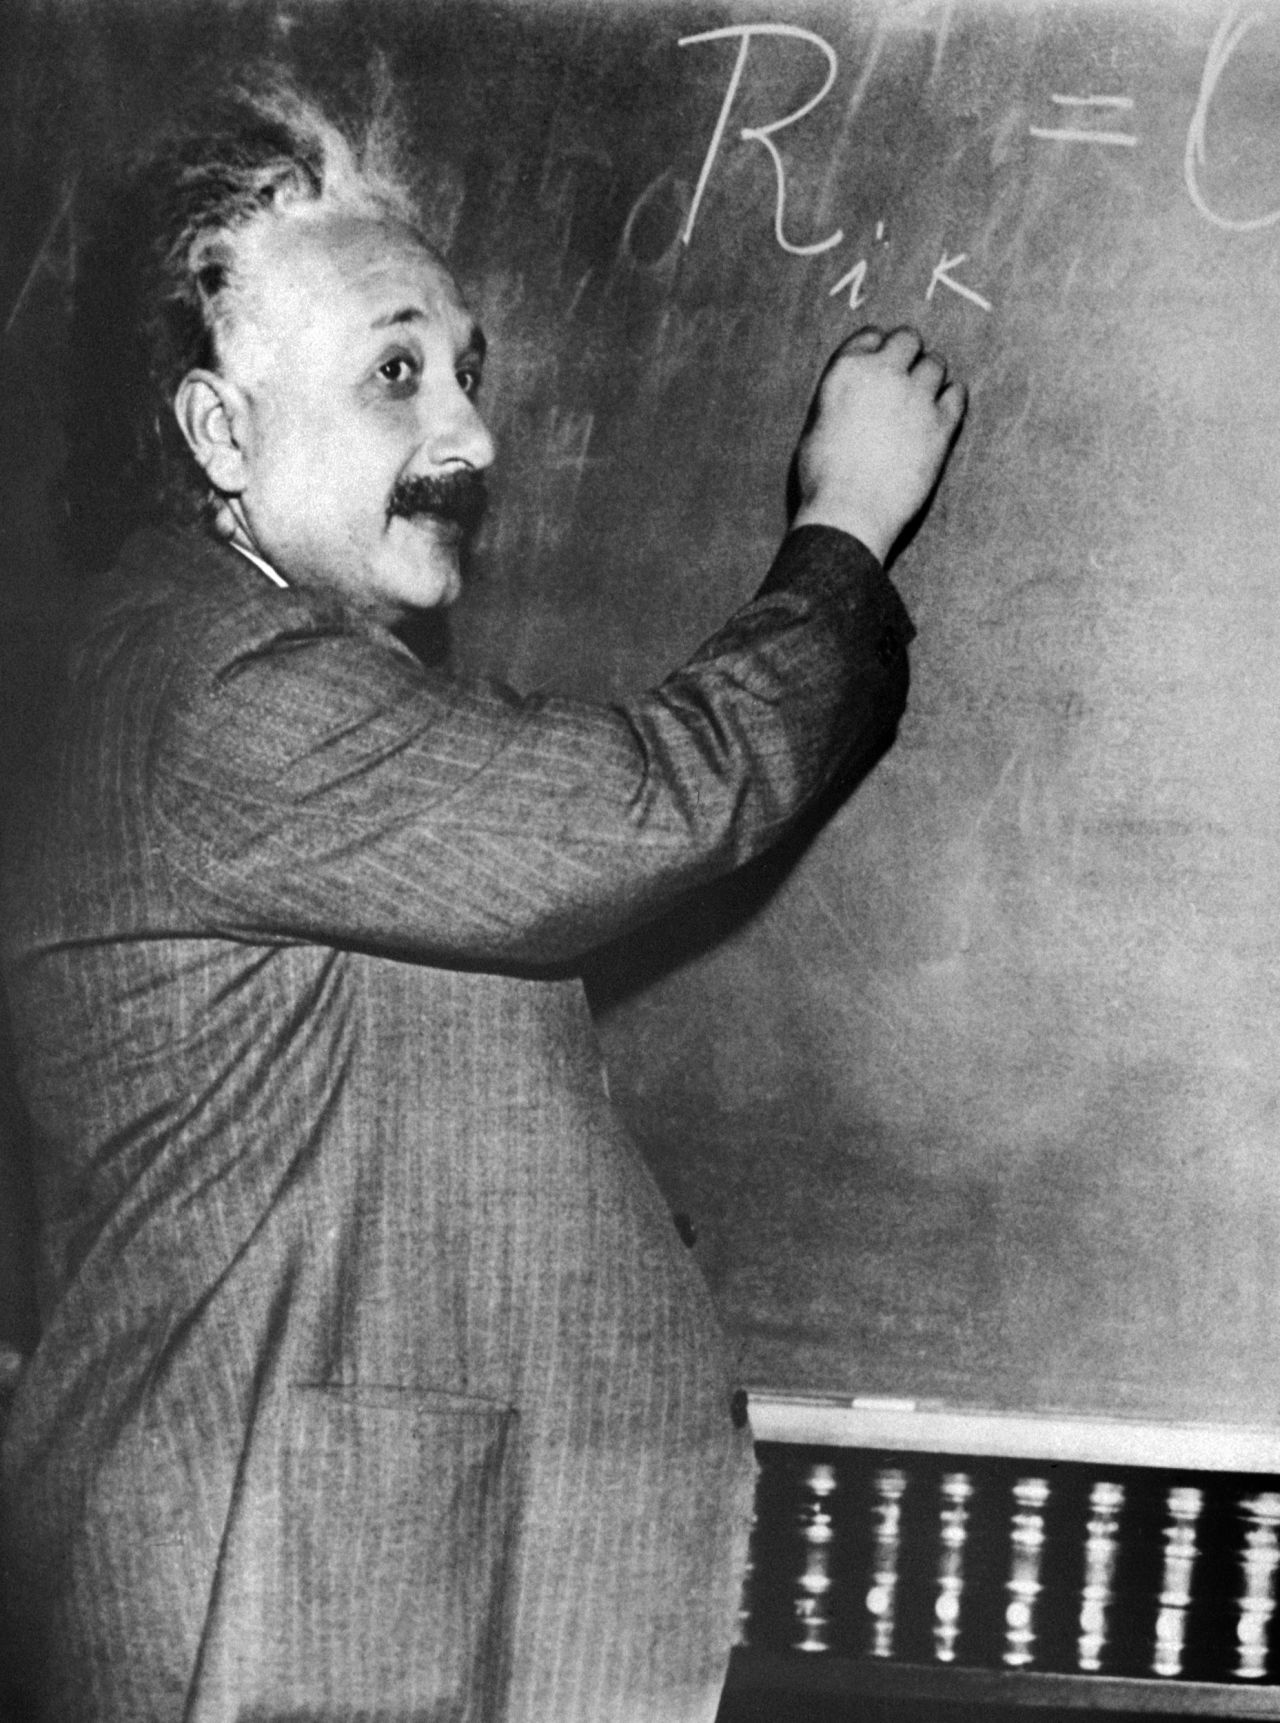 Albert Einstein's theory of general relativity completely overturned our understanding of the nature of gravity, space and time.